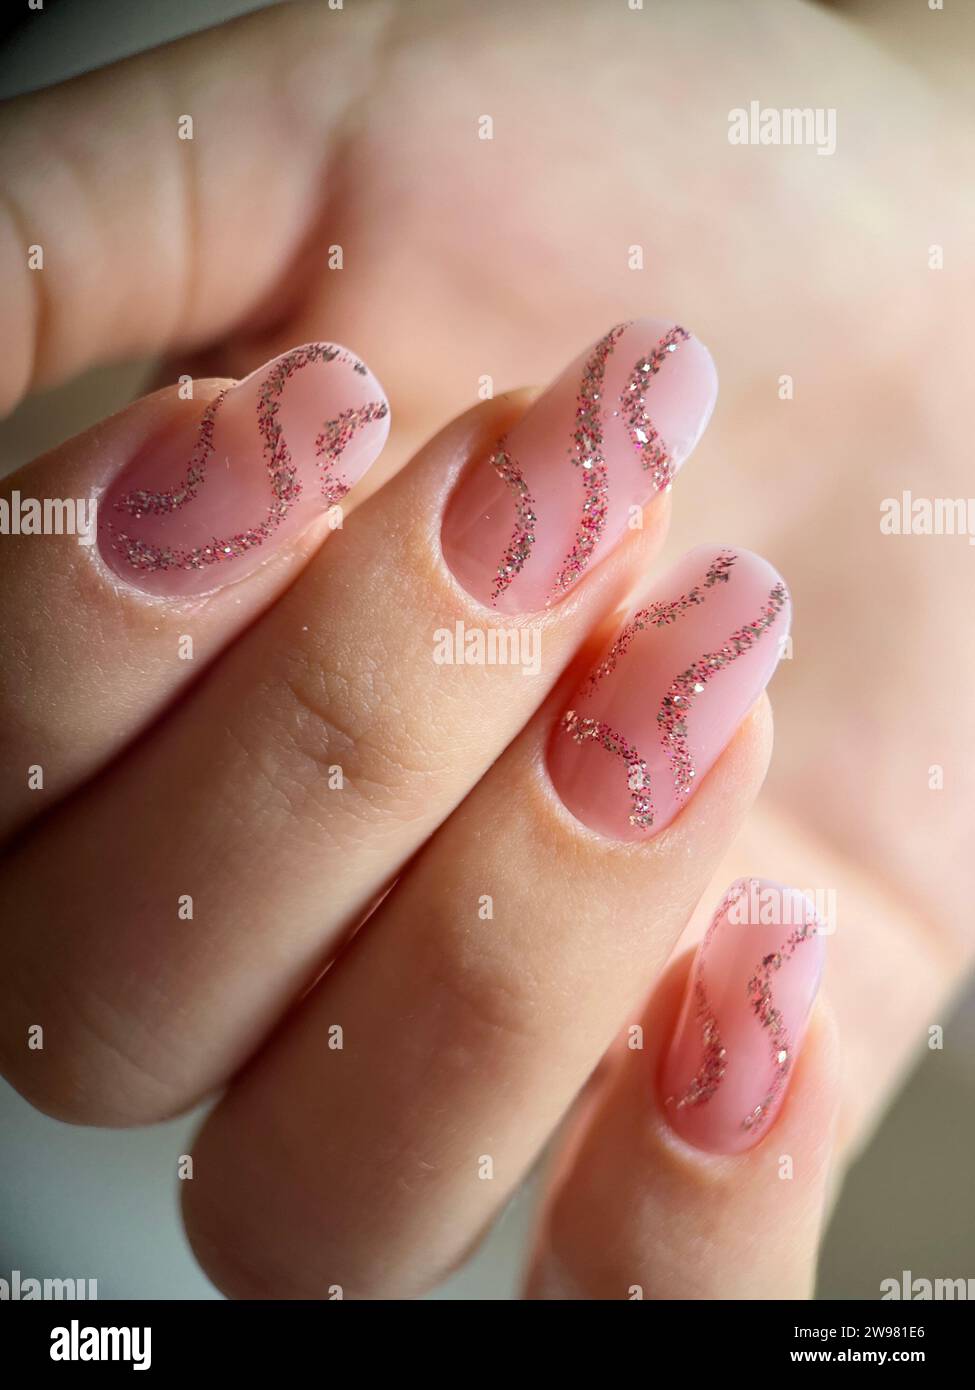 A female displaying a glamorous manicure with sparkling nails Stock Photo